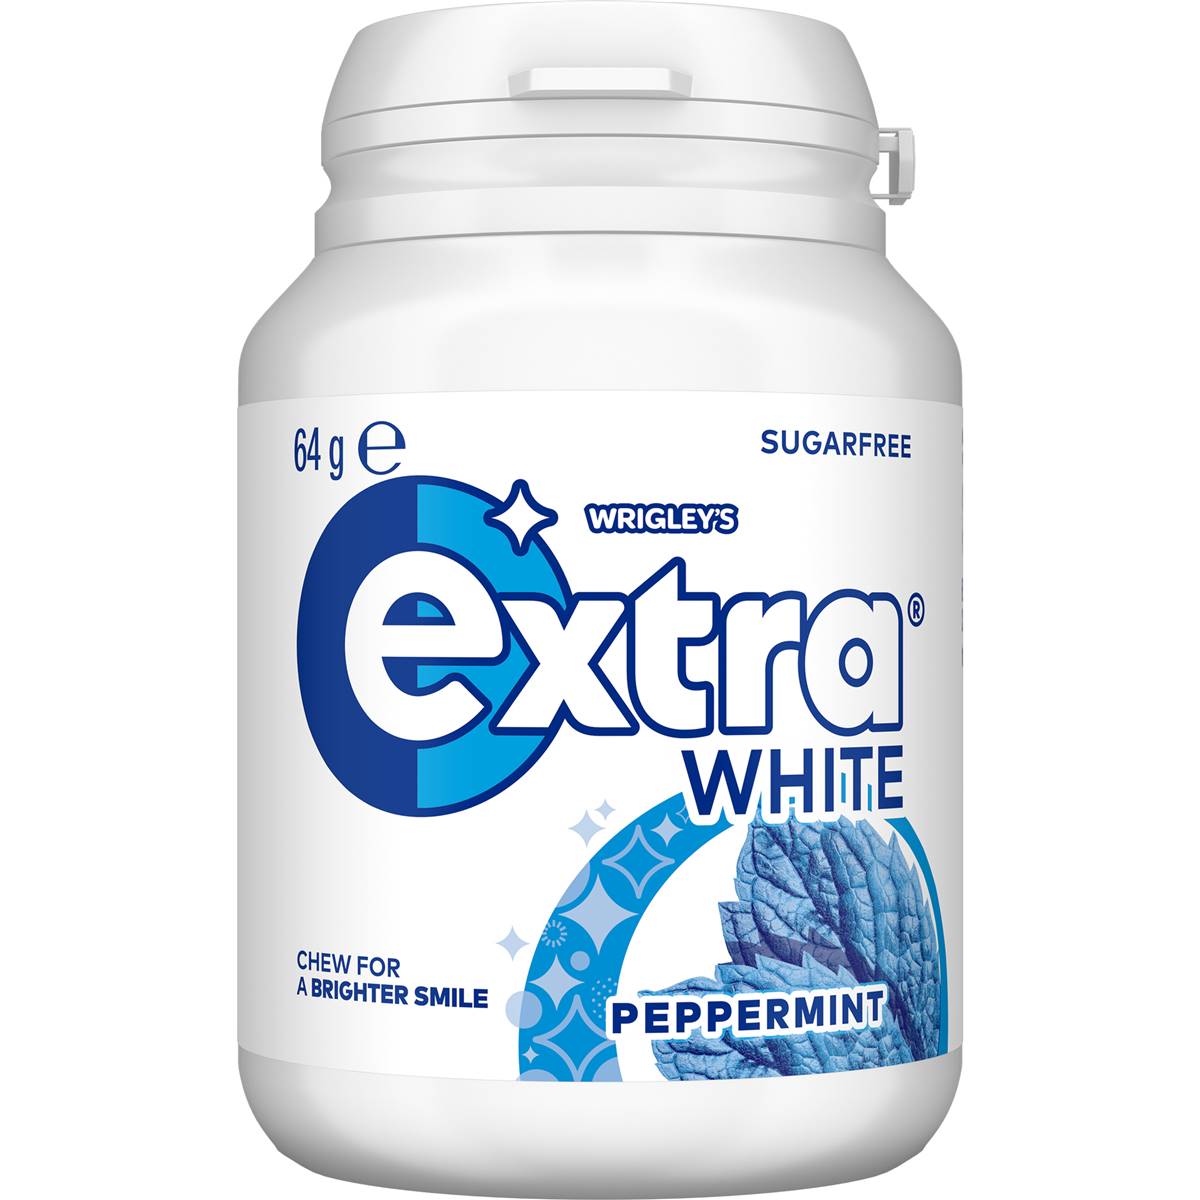 Calories in Wrigley's Extra White Peppermint Chewing Gum Sugar Free Bottle